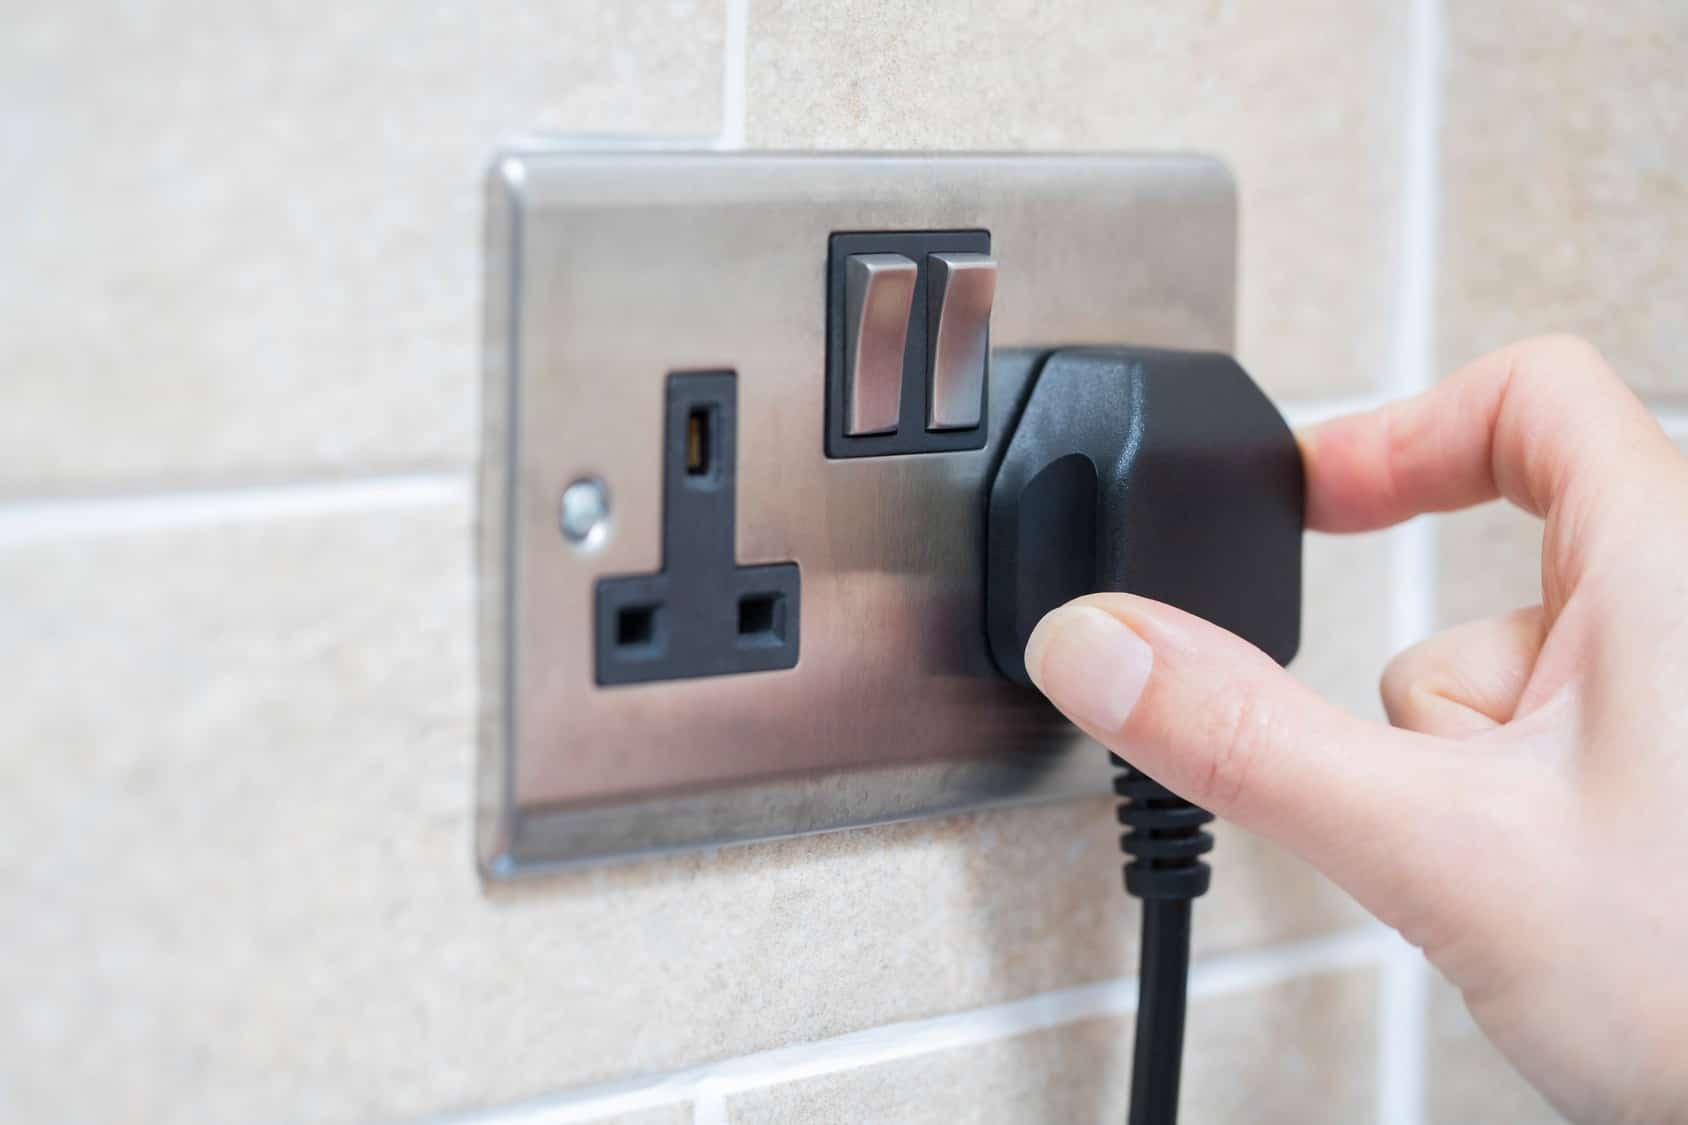 Wall power outlet